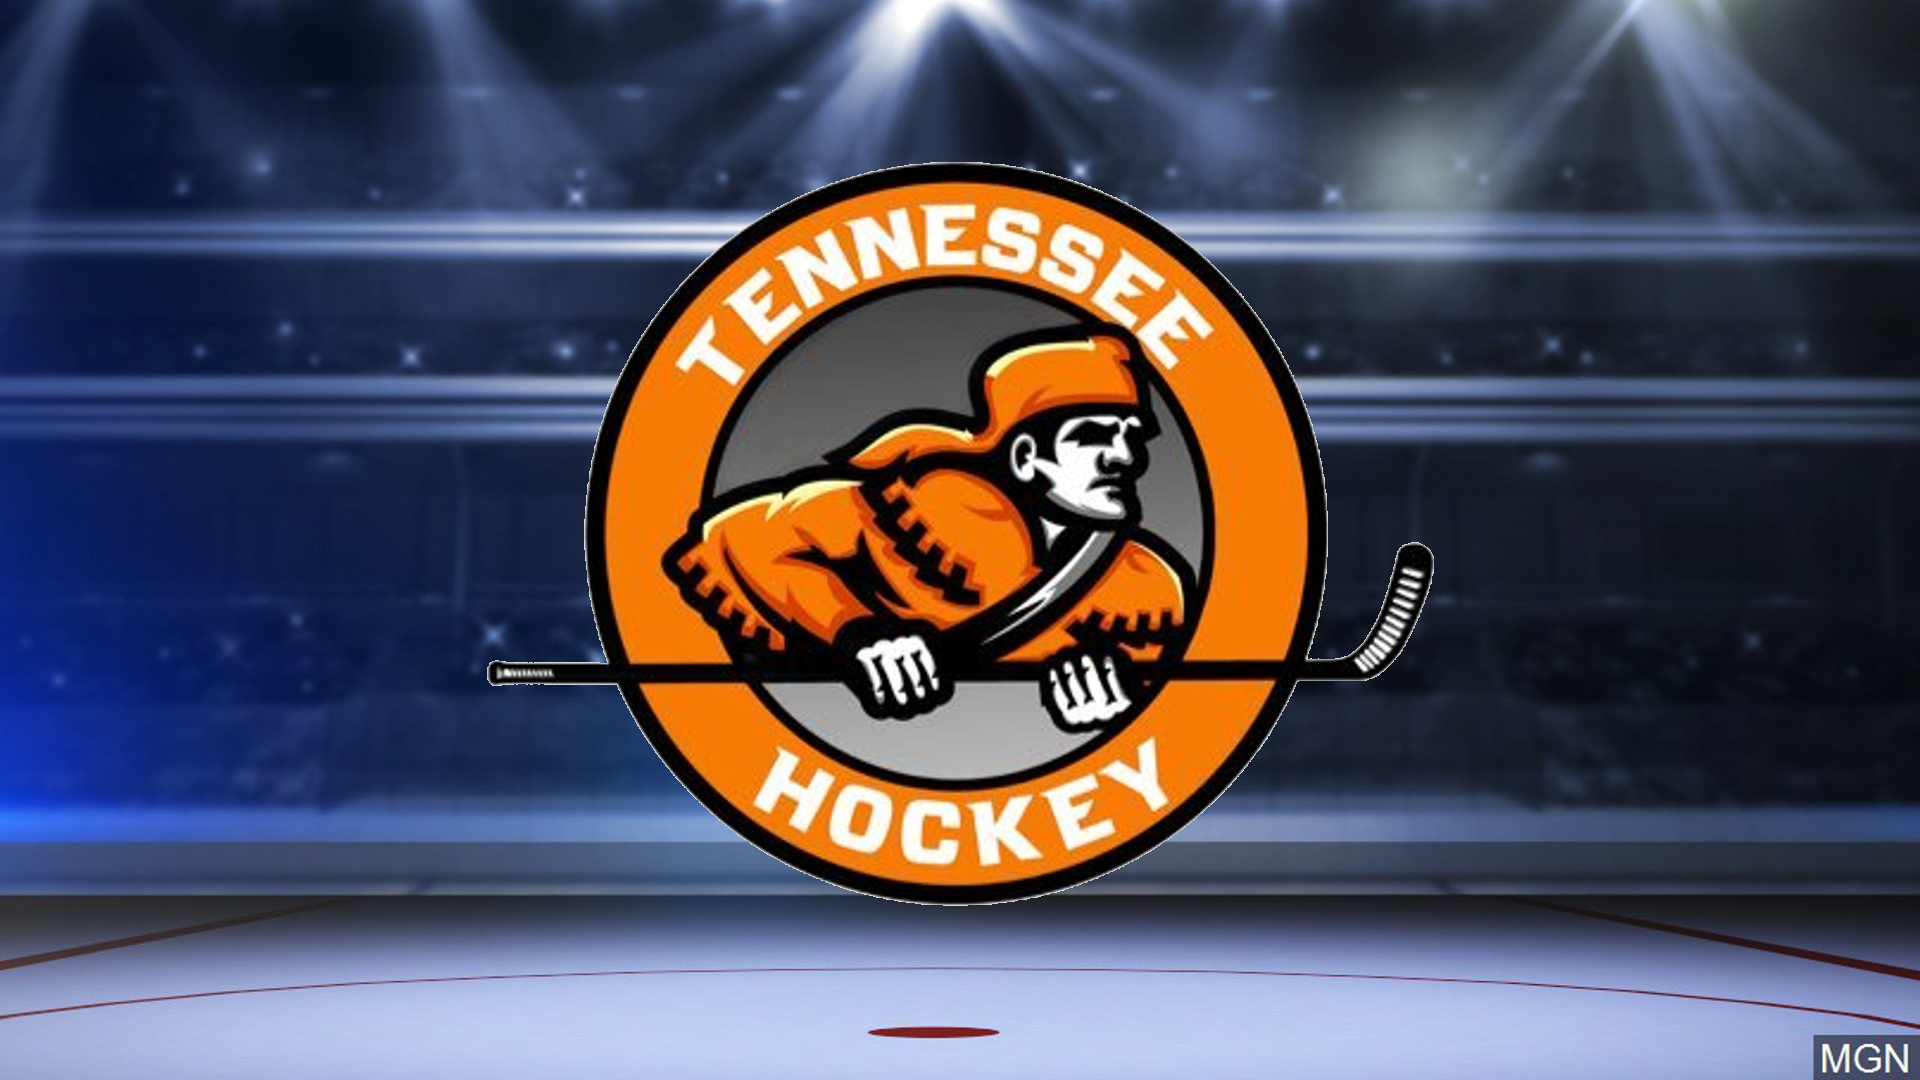 University of Tennessee club hockey team looks to Vol Nation for funding